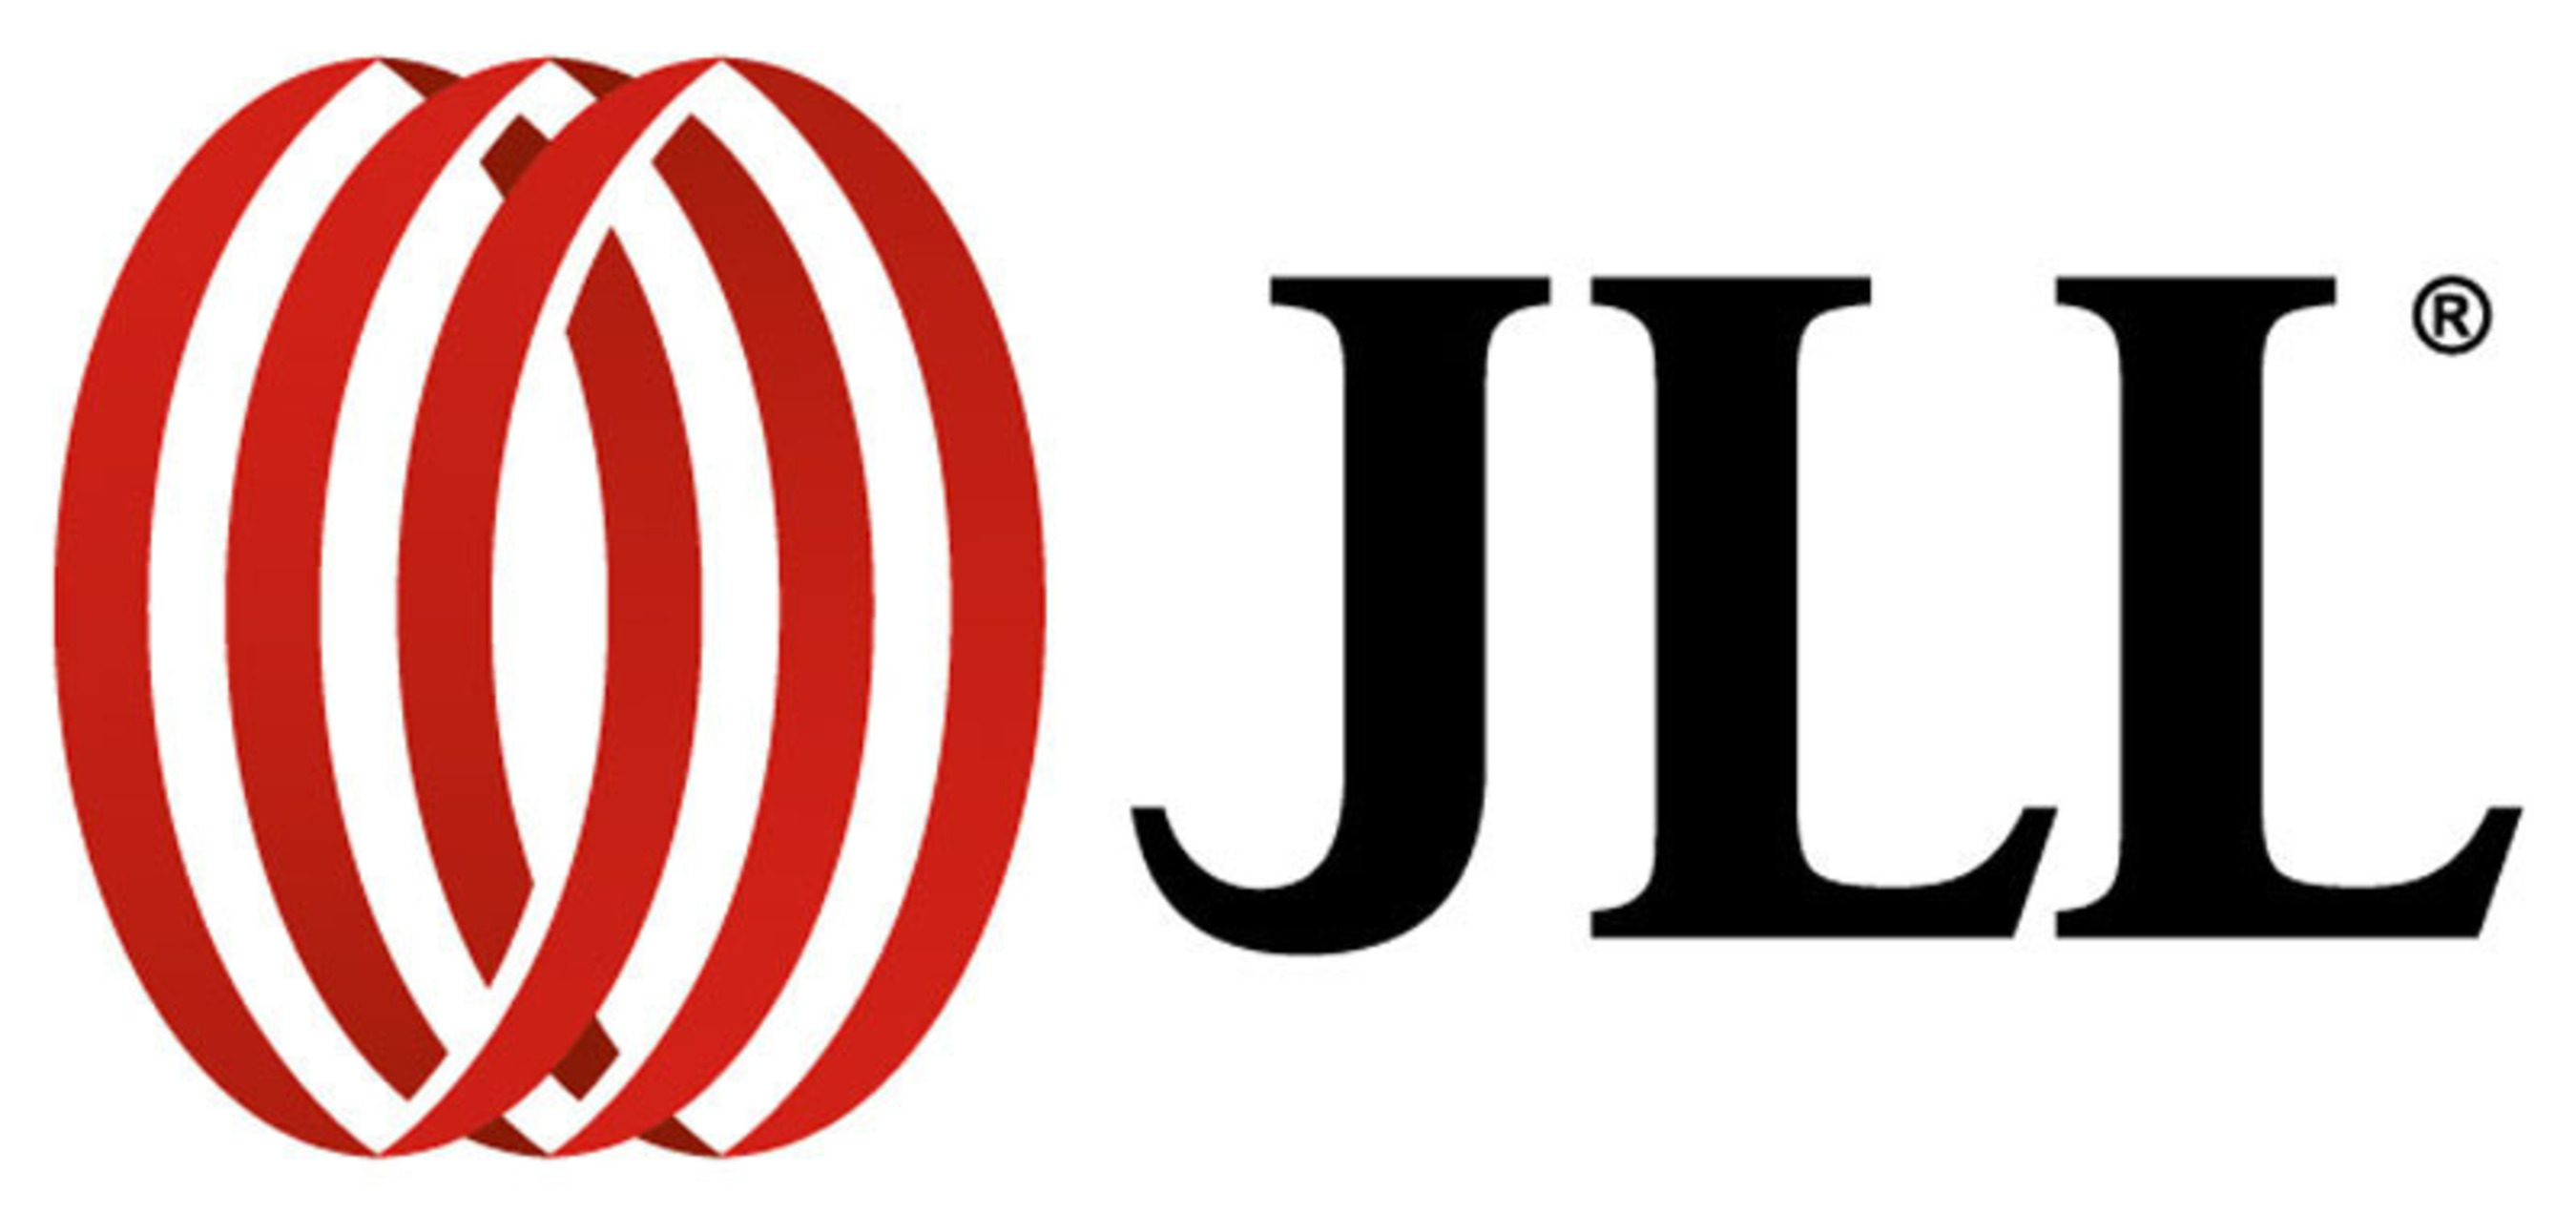 jones lang lasalle shortens name to "jll" and unveils new logo